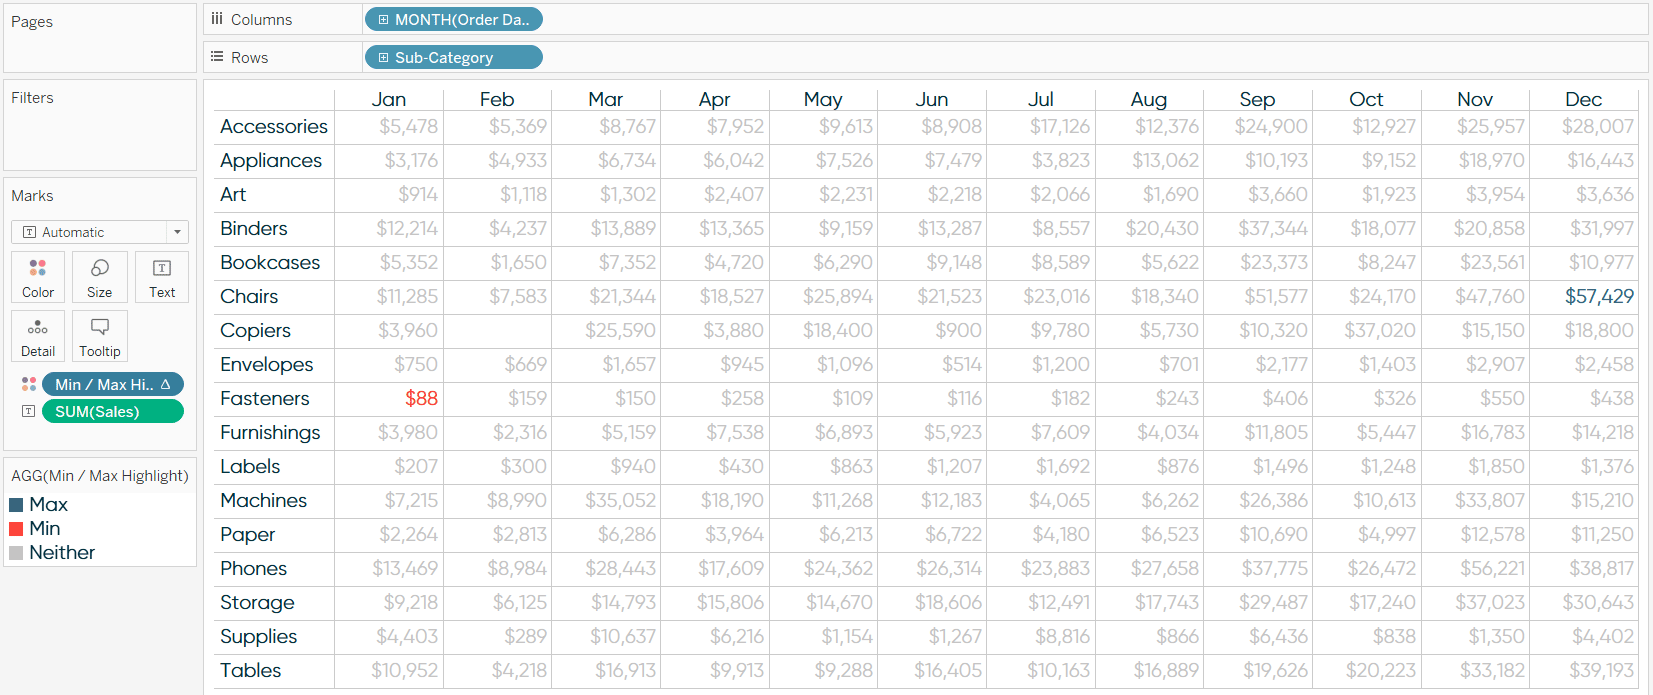 Tableau Crosstab and MIN and MAX Values Highlighted